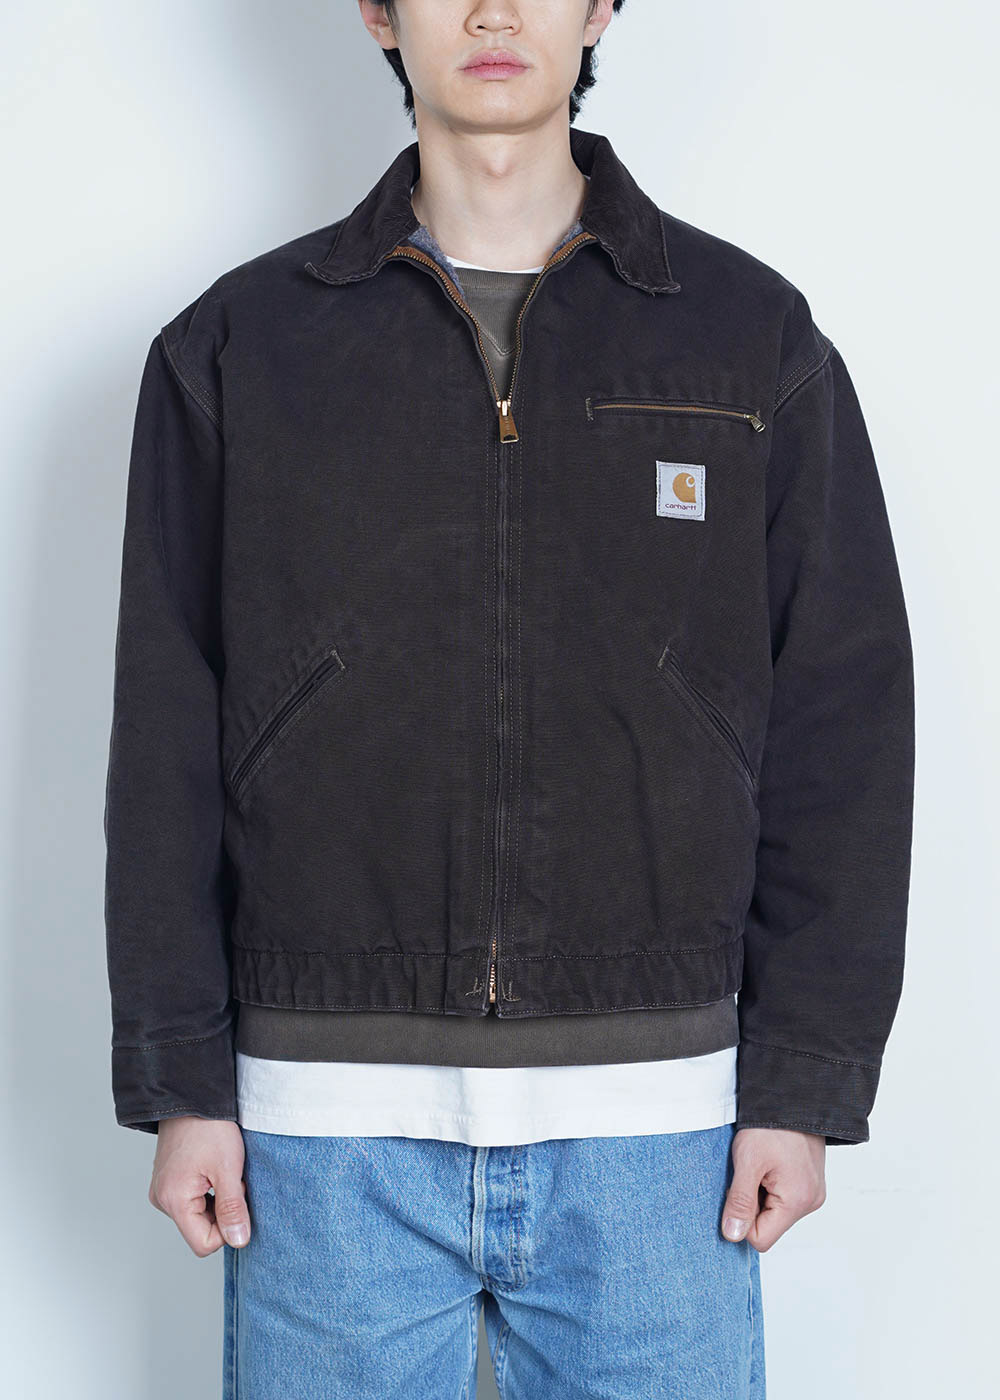 reproduction 033 / carhartt (Overdyed)